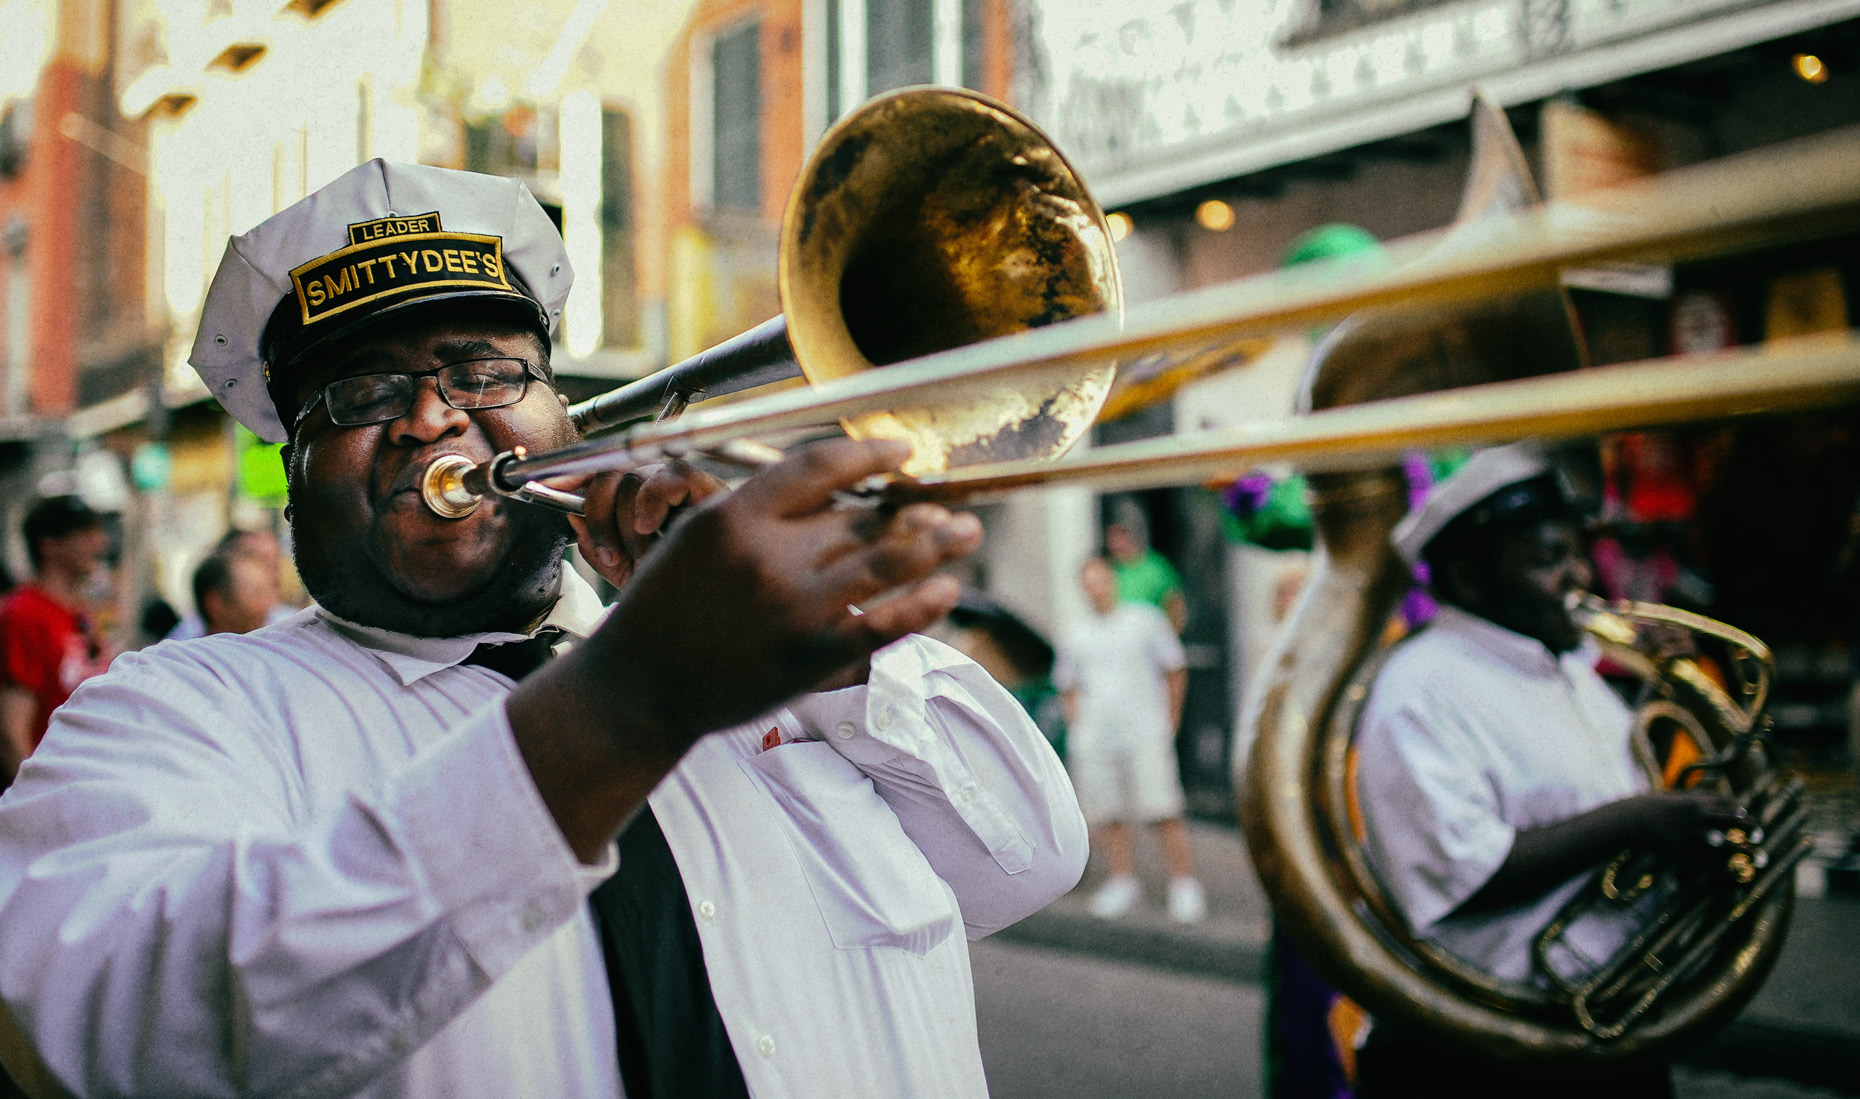 Trombone player in New Orleans by photographer Kevin Brown